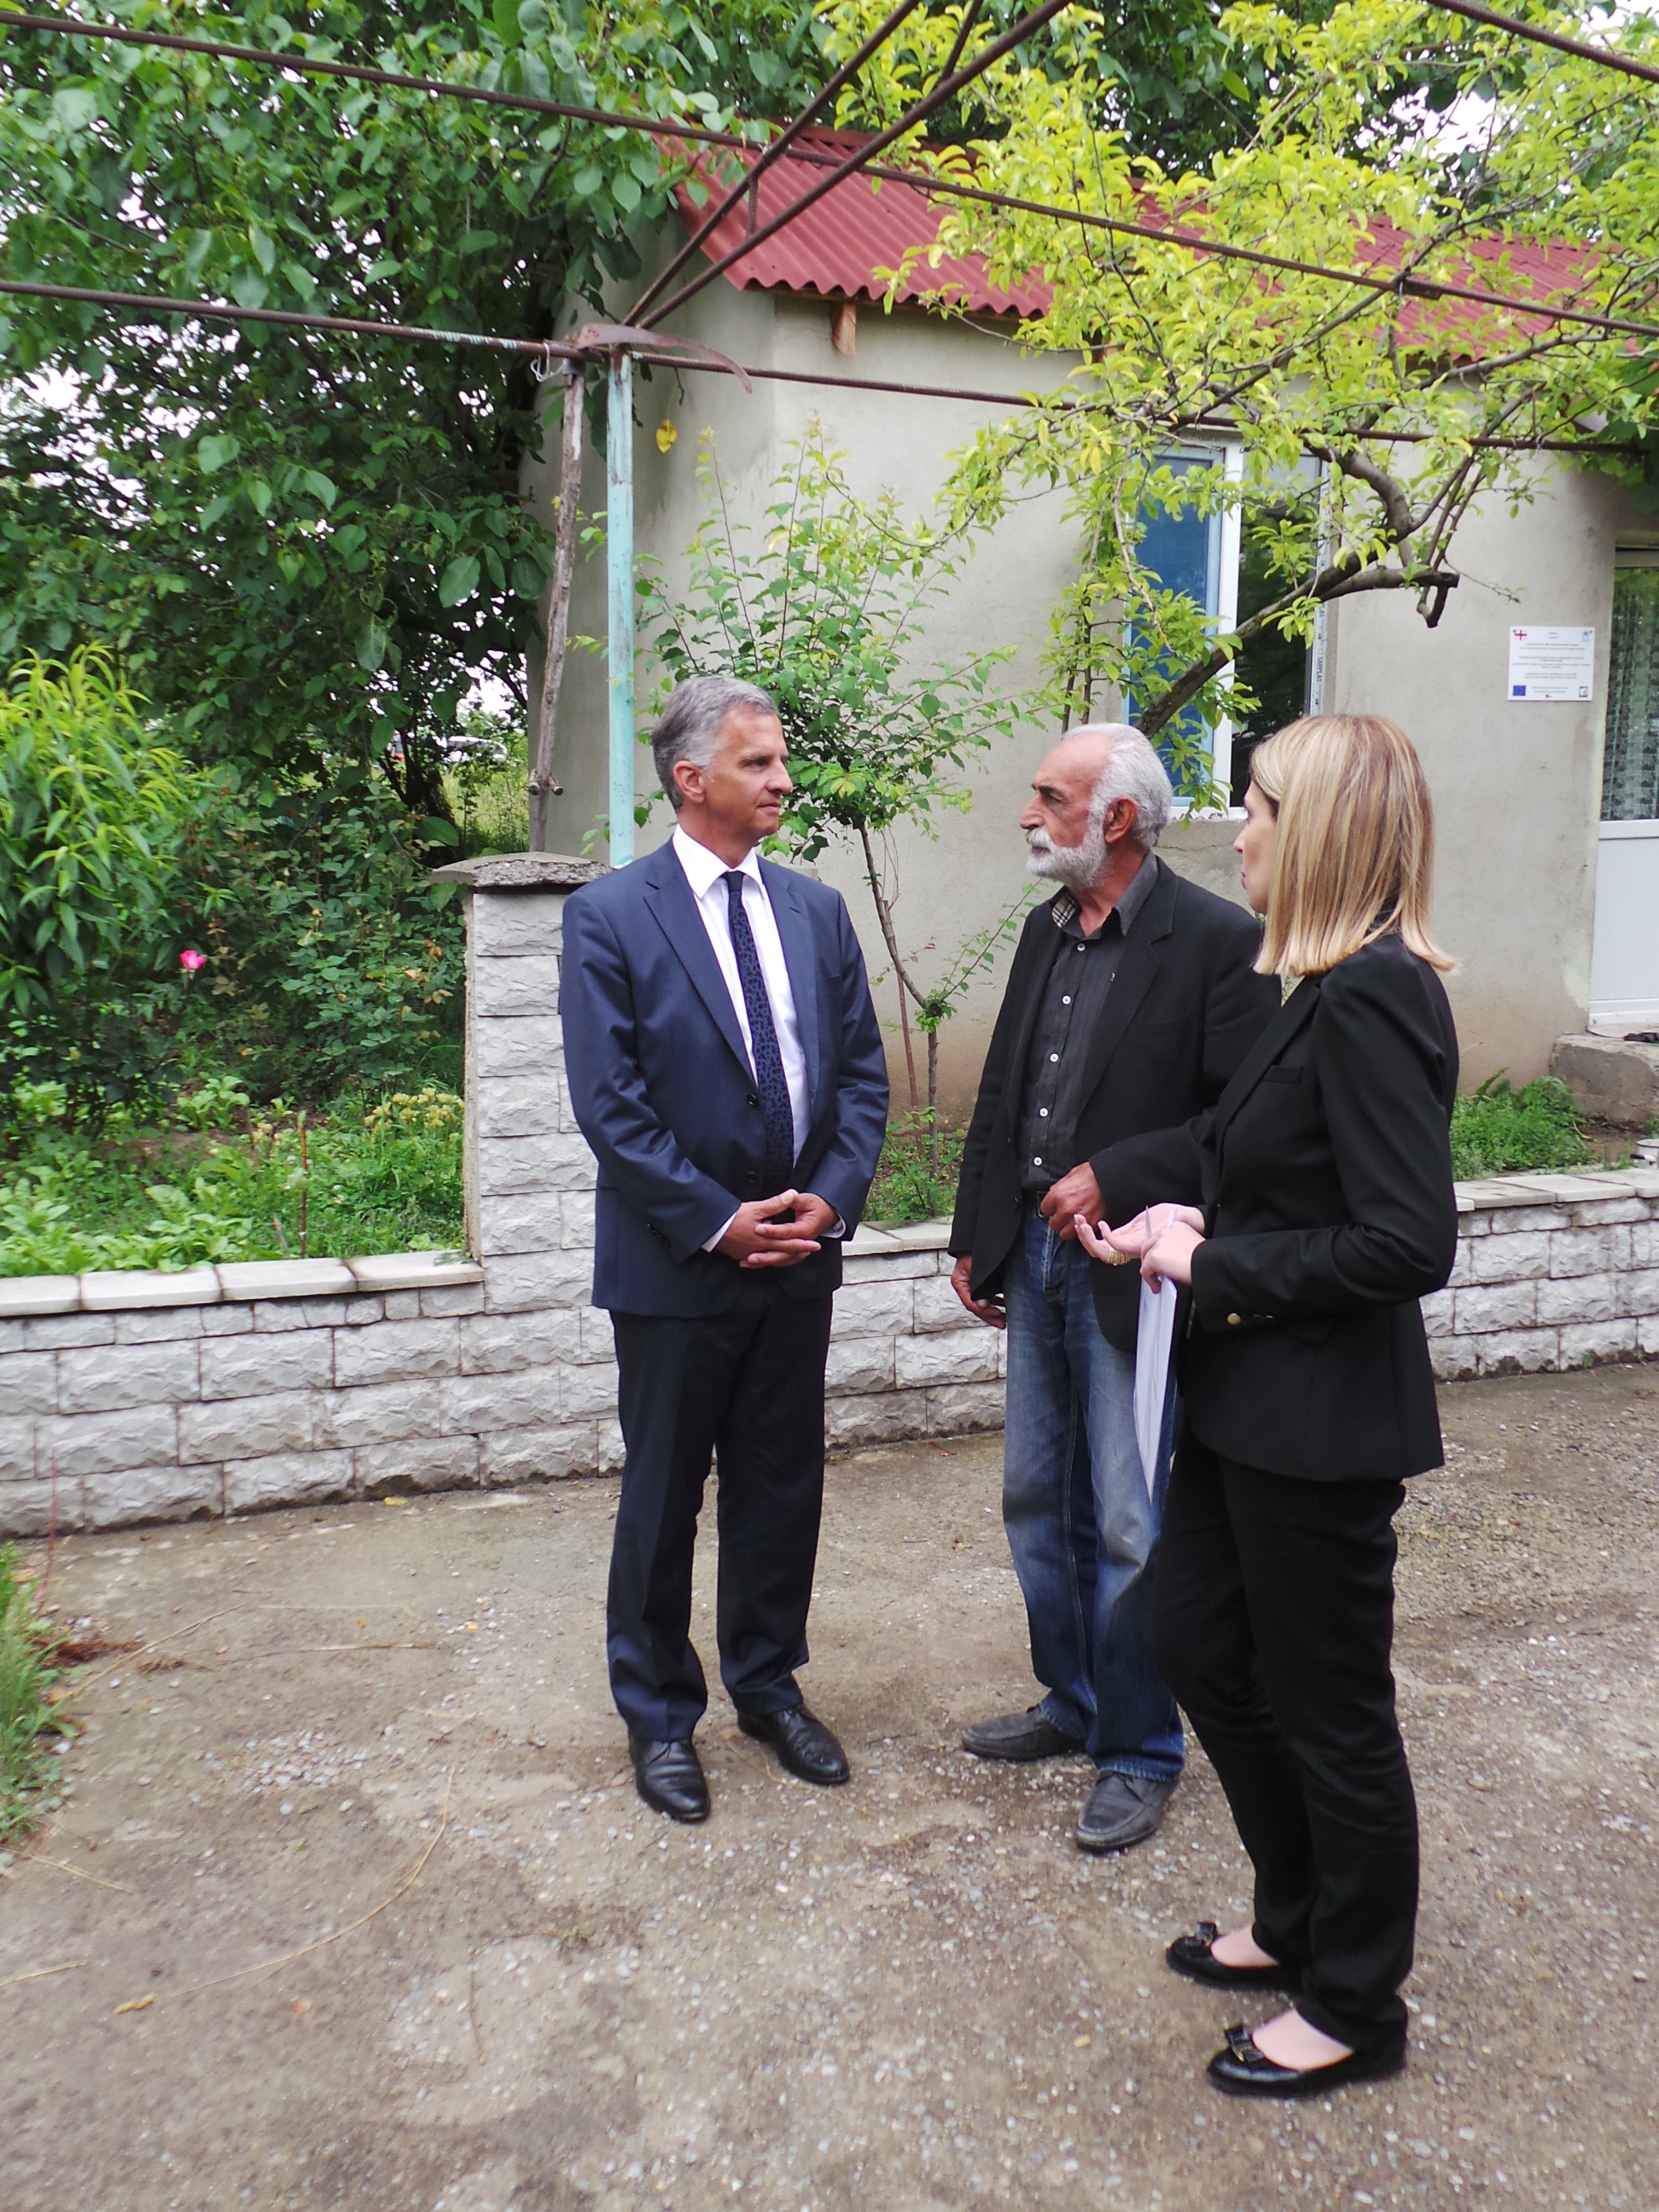 The President of the Swiss Confederation, Didier Burkhalter, talks with the owner of a house that had been destroyed in the conflict and which has been rebuilt with SDC support.